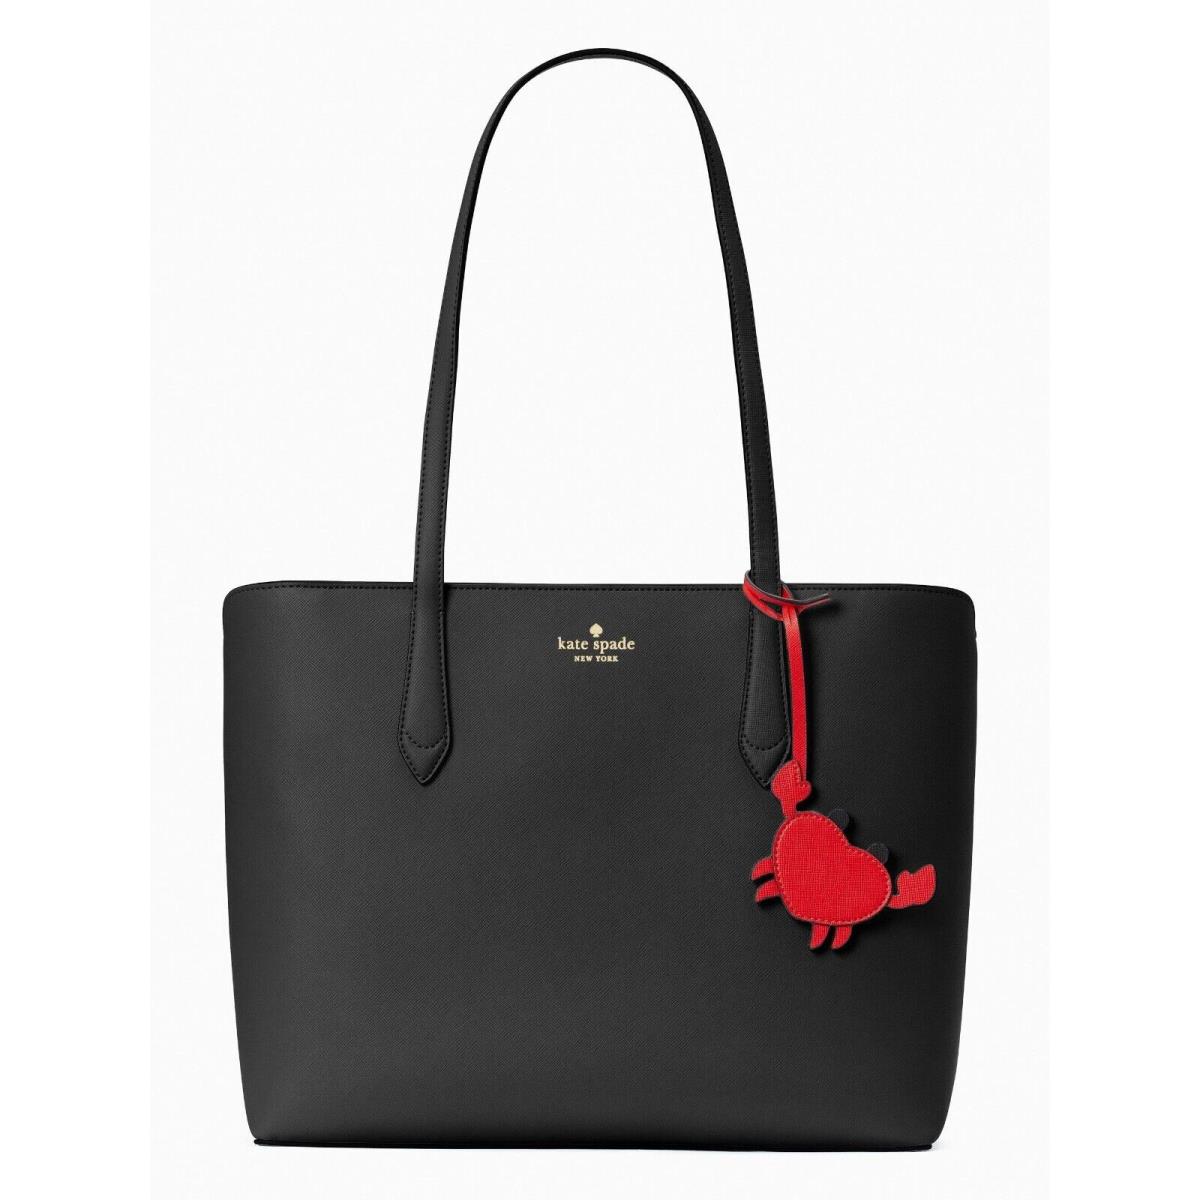 New Kate Spade Marlee Tote Saffiano Black with Red Crab Charm